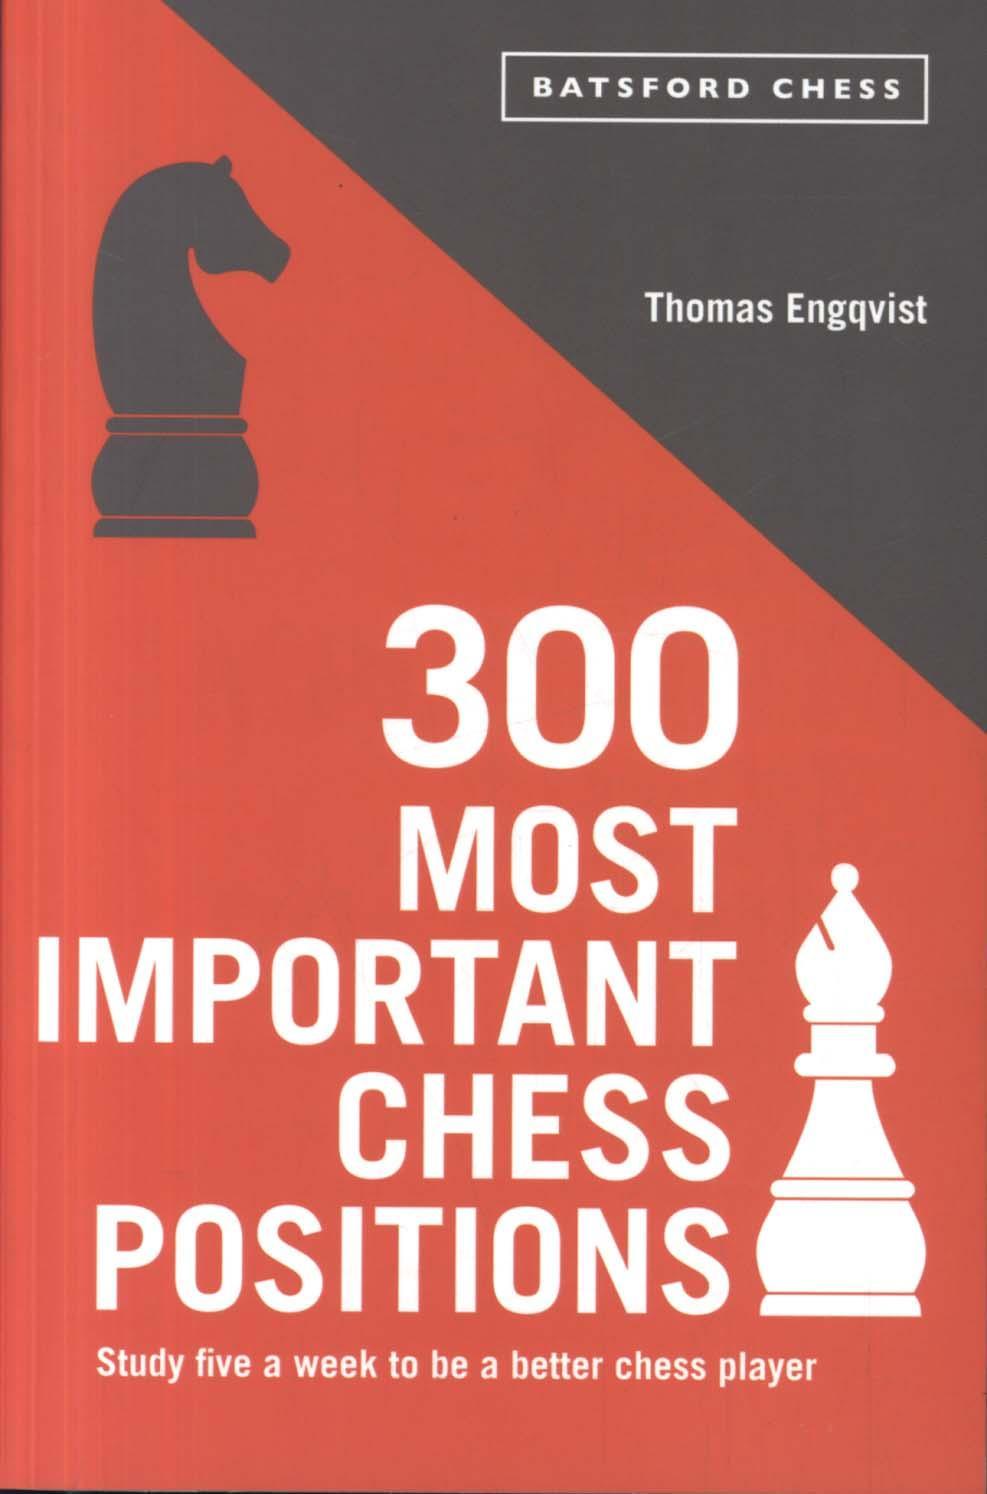 300 MOST IMPORTANT CHESS POSITIONS